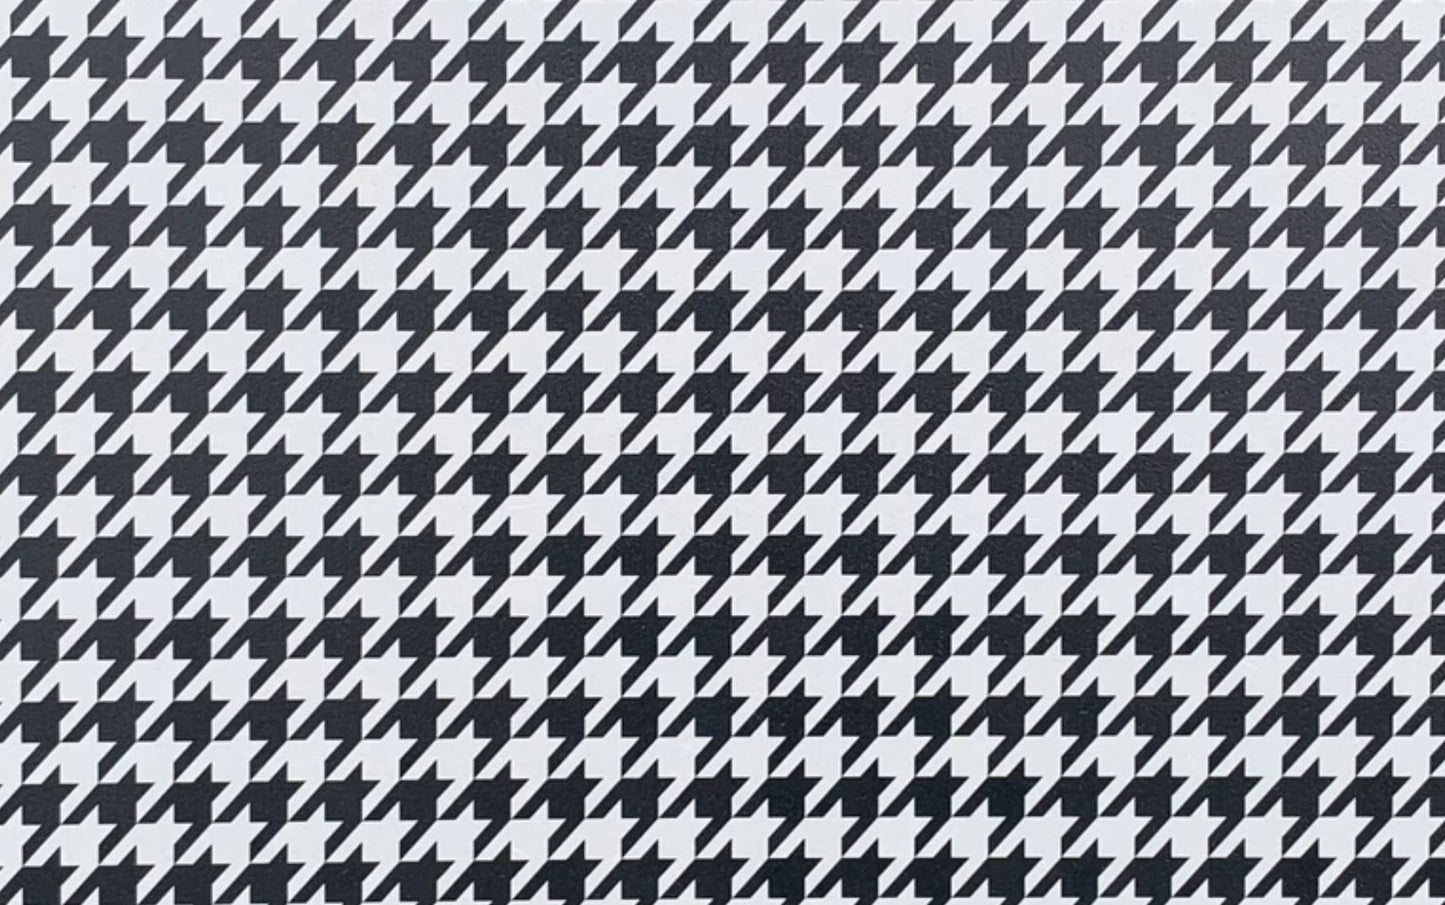 Hounds Tooth- Printed Pattern Designs (Sets)